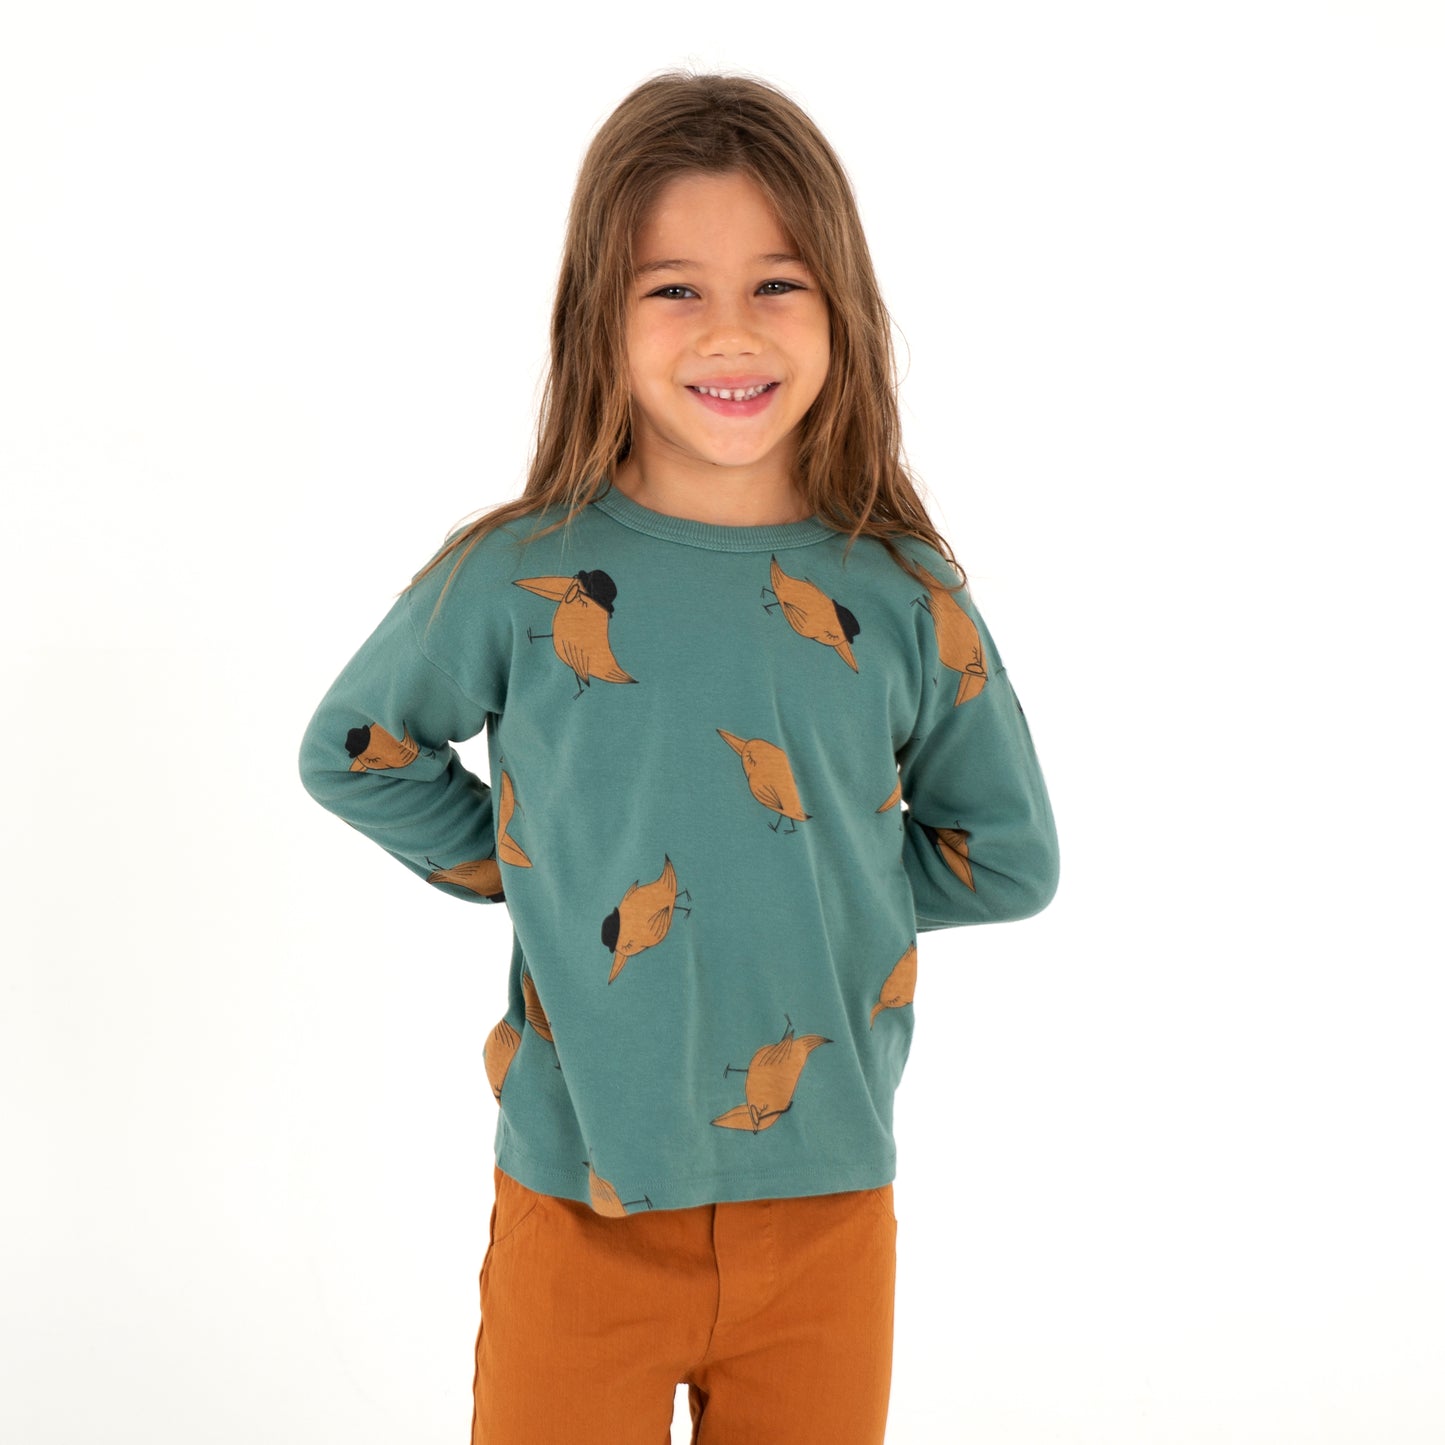 Green birds with hats long sleeve t-shirt (1-2, 2-3, and 6-7 left)